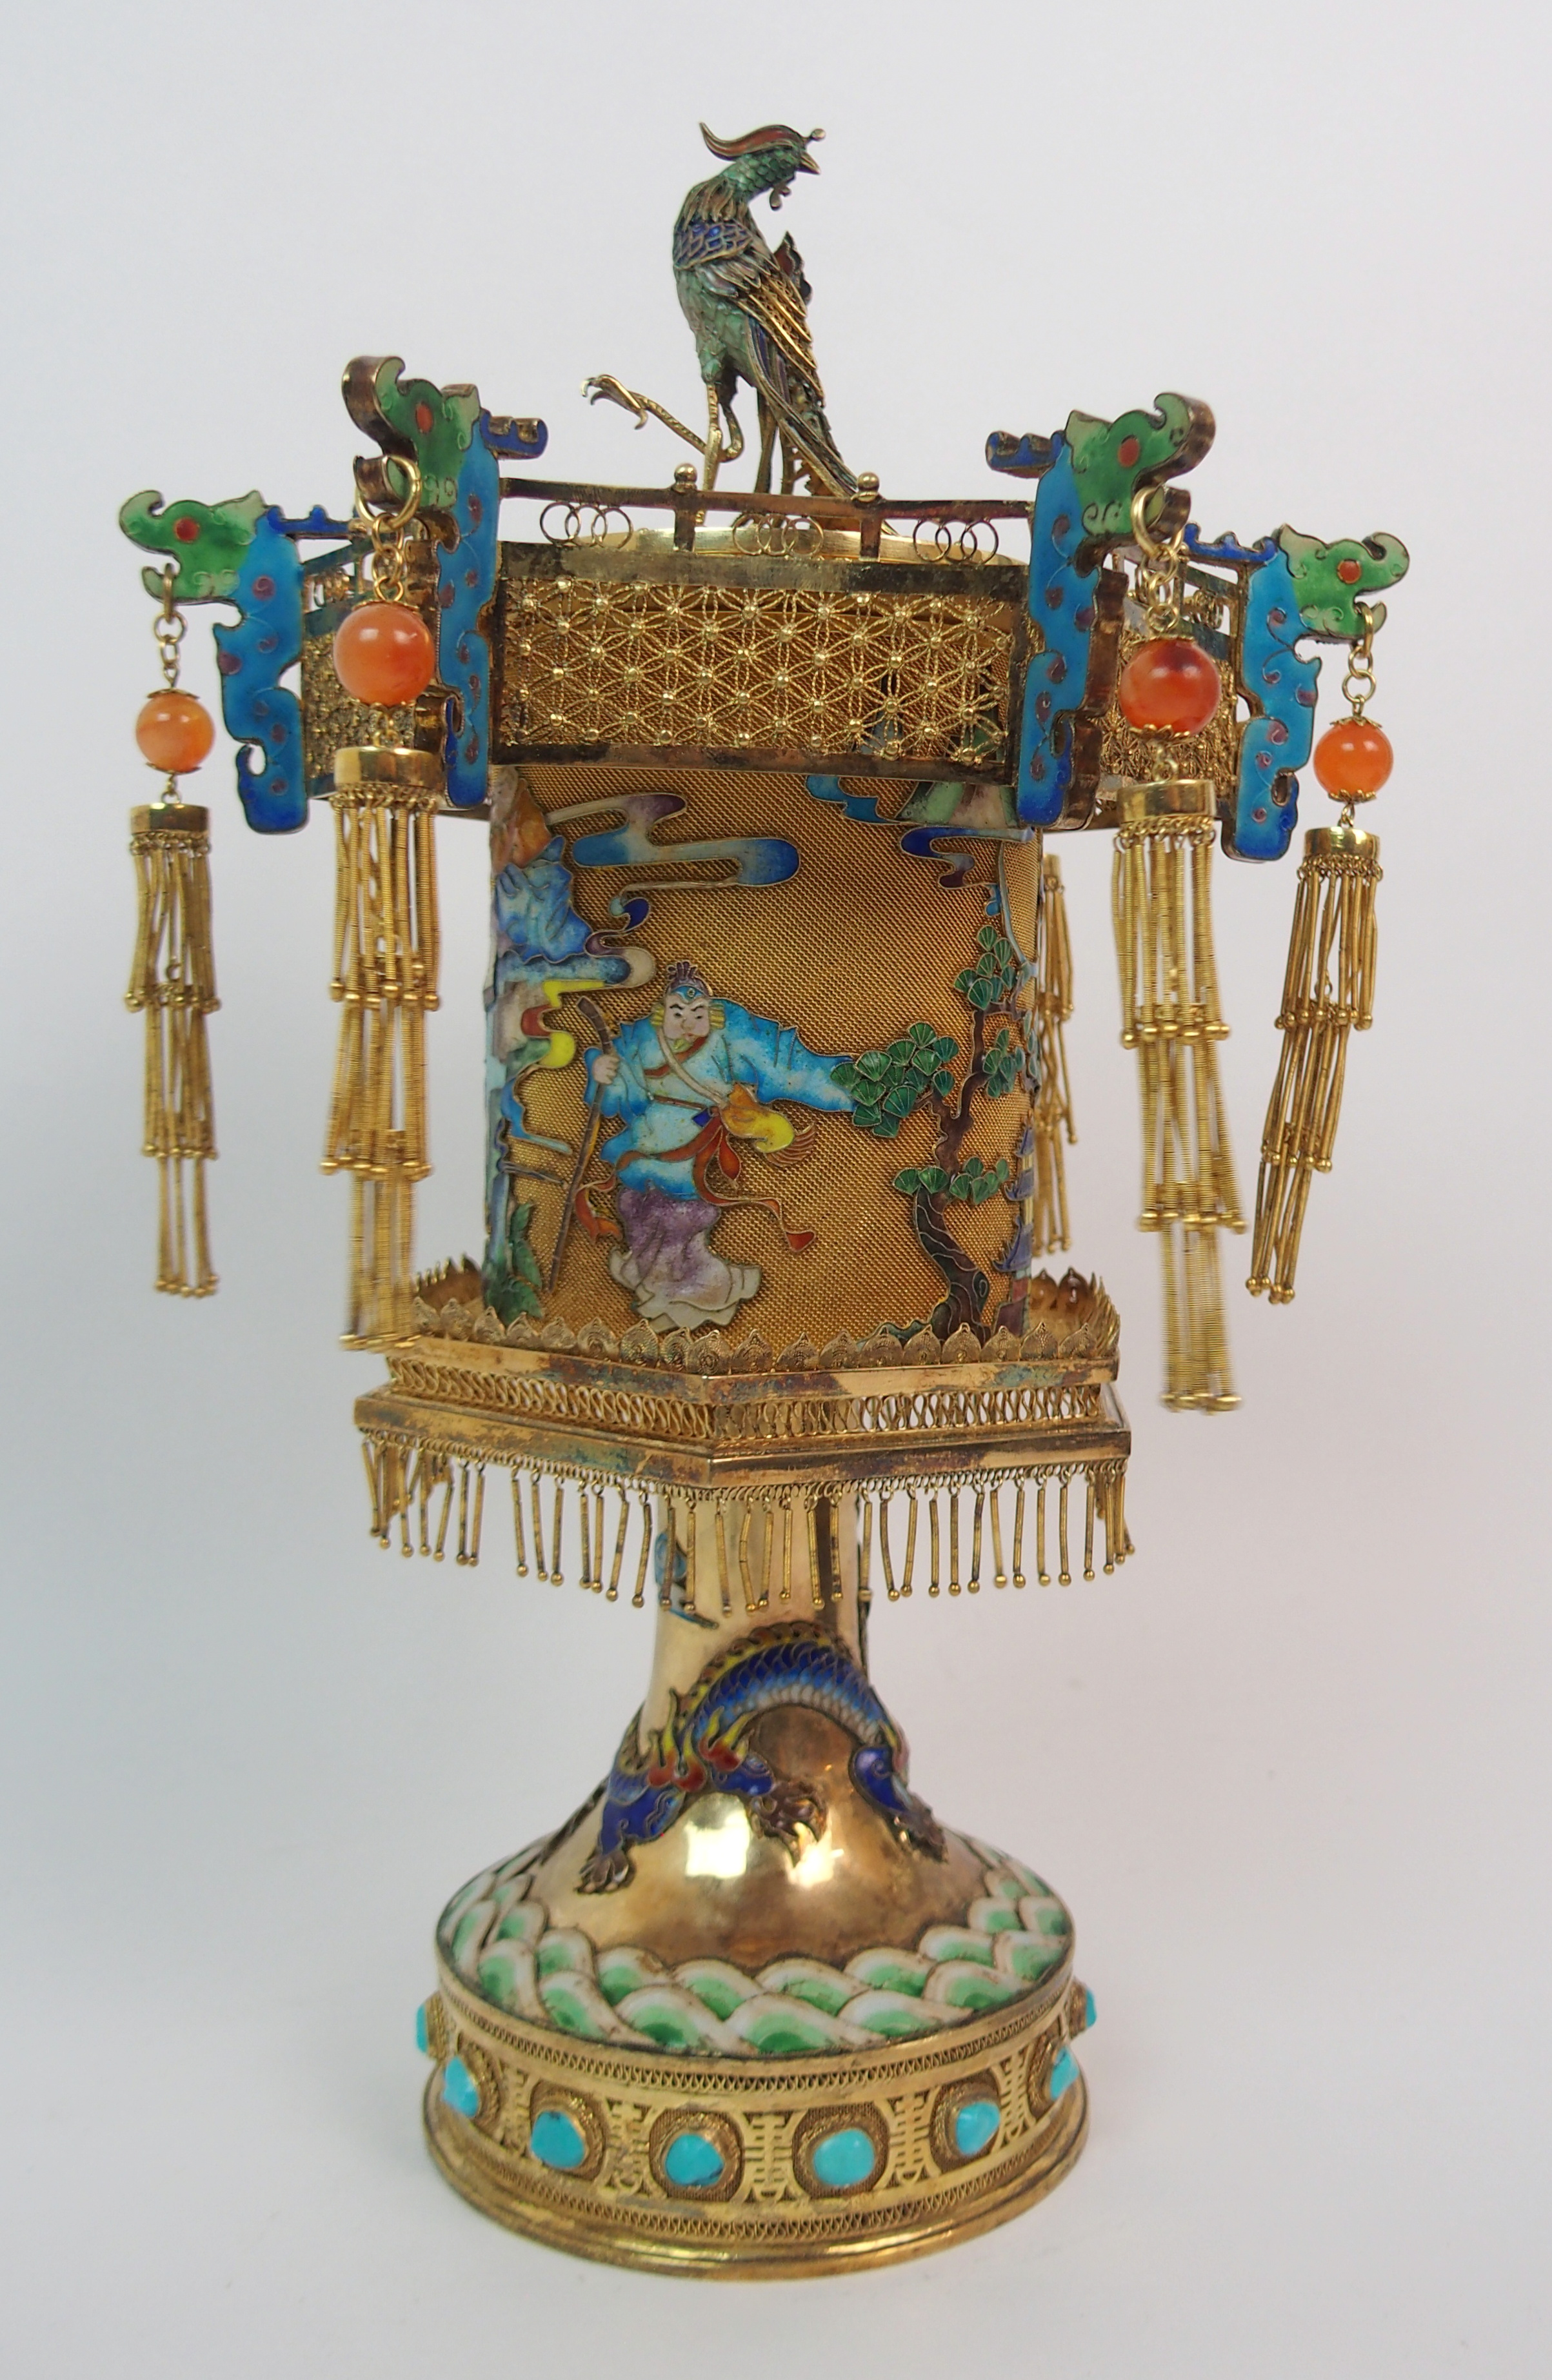 A CHINESE GILT METAL, ENAMEL AND HARDSTONE HEXAGONAL PAGODA CENSER decorated with a peacock finial - Image 7 of 10